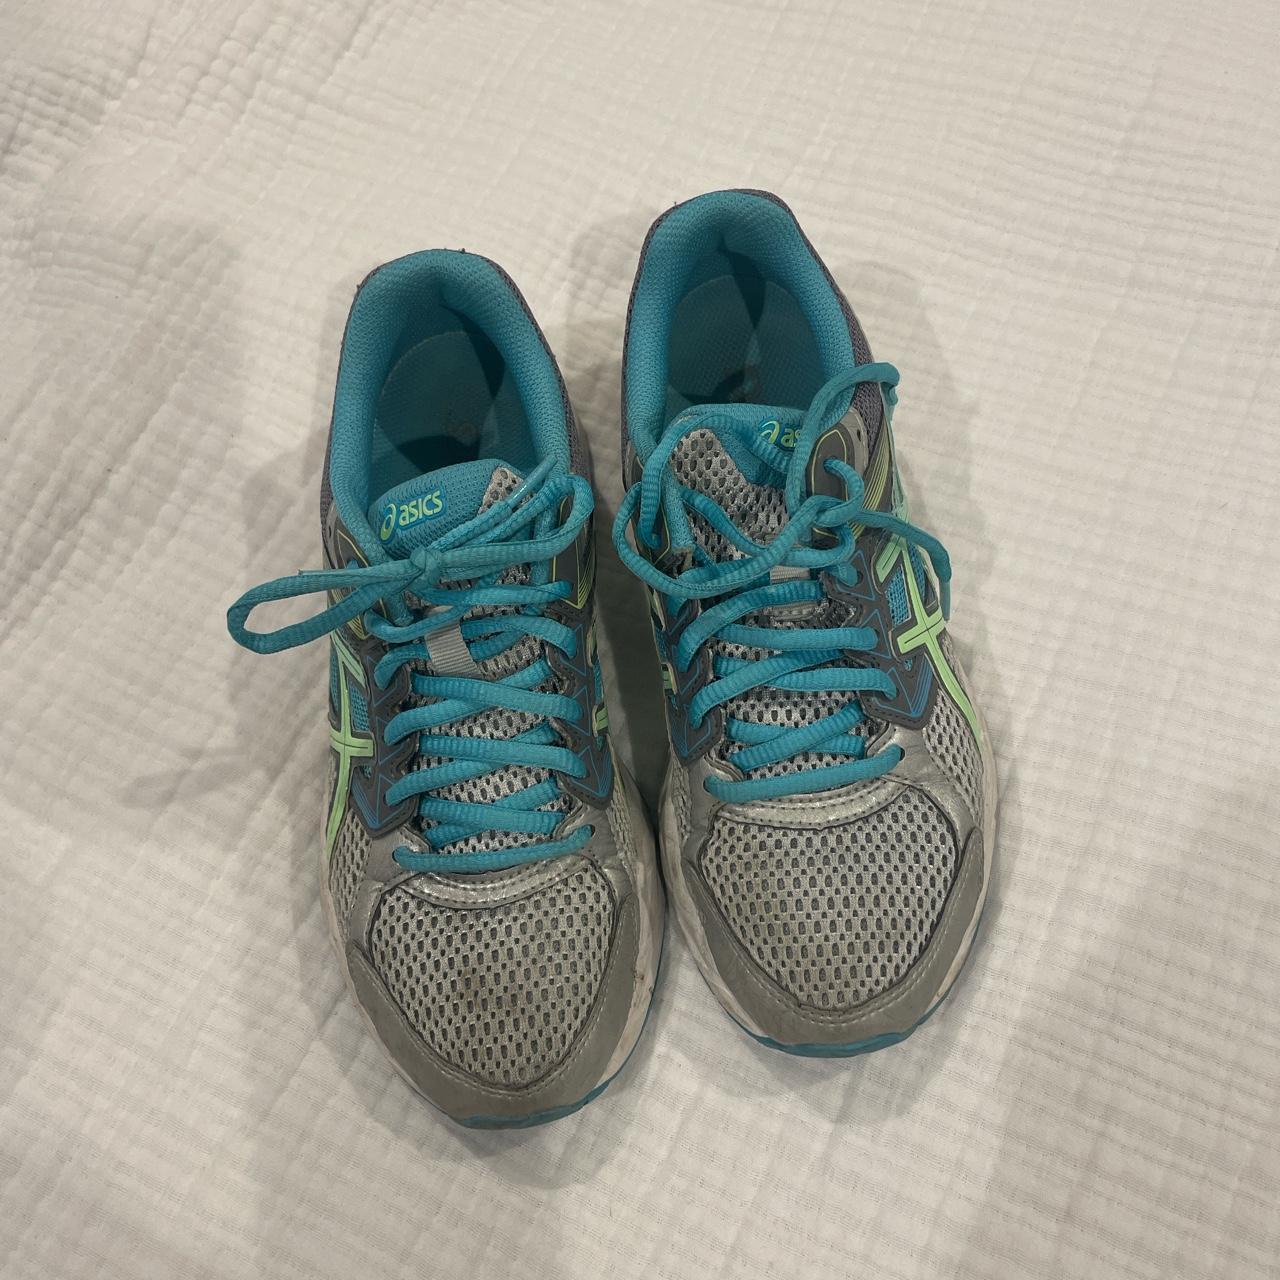 Women's Grey and Blue Trainers (2)